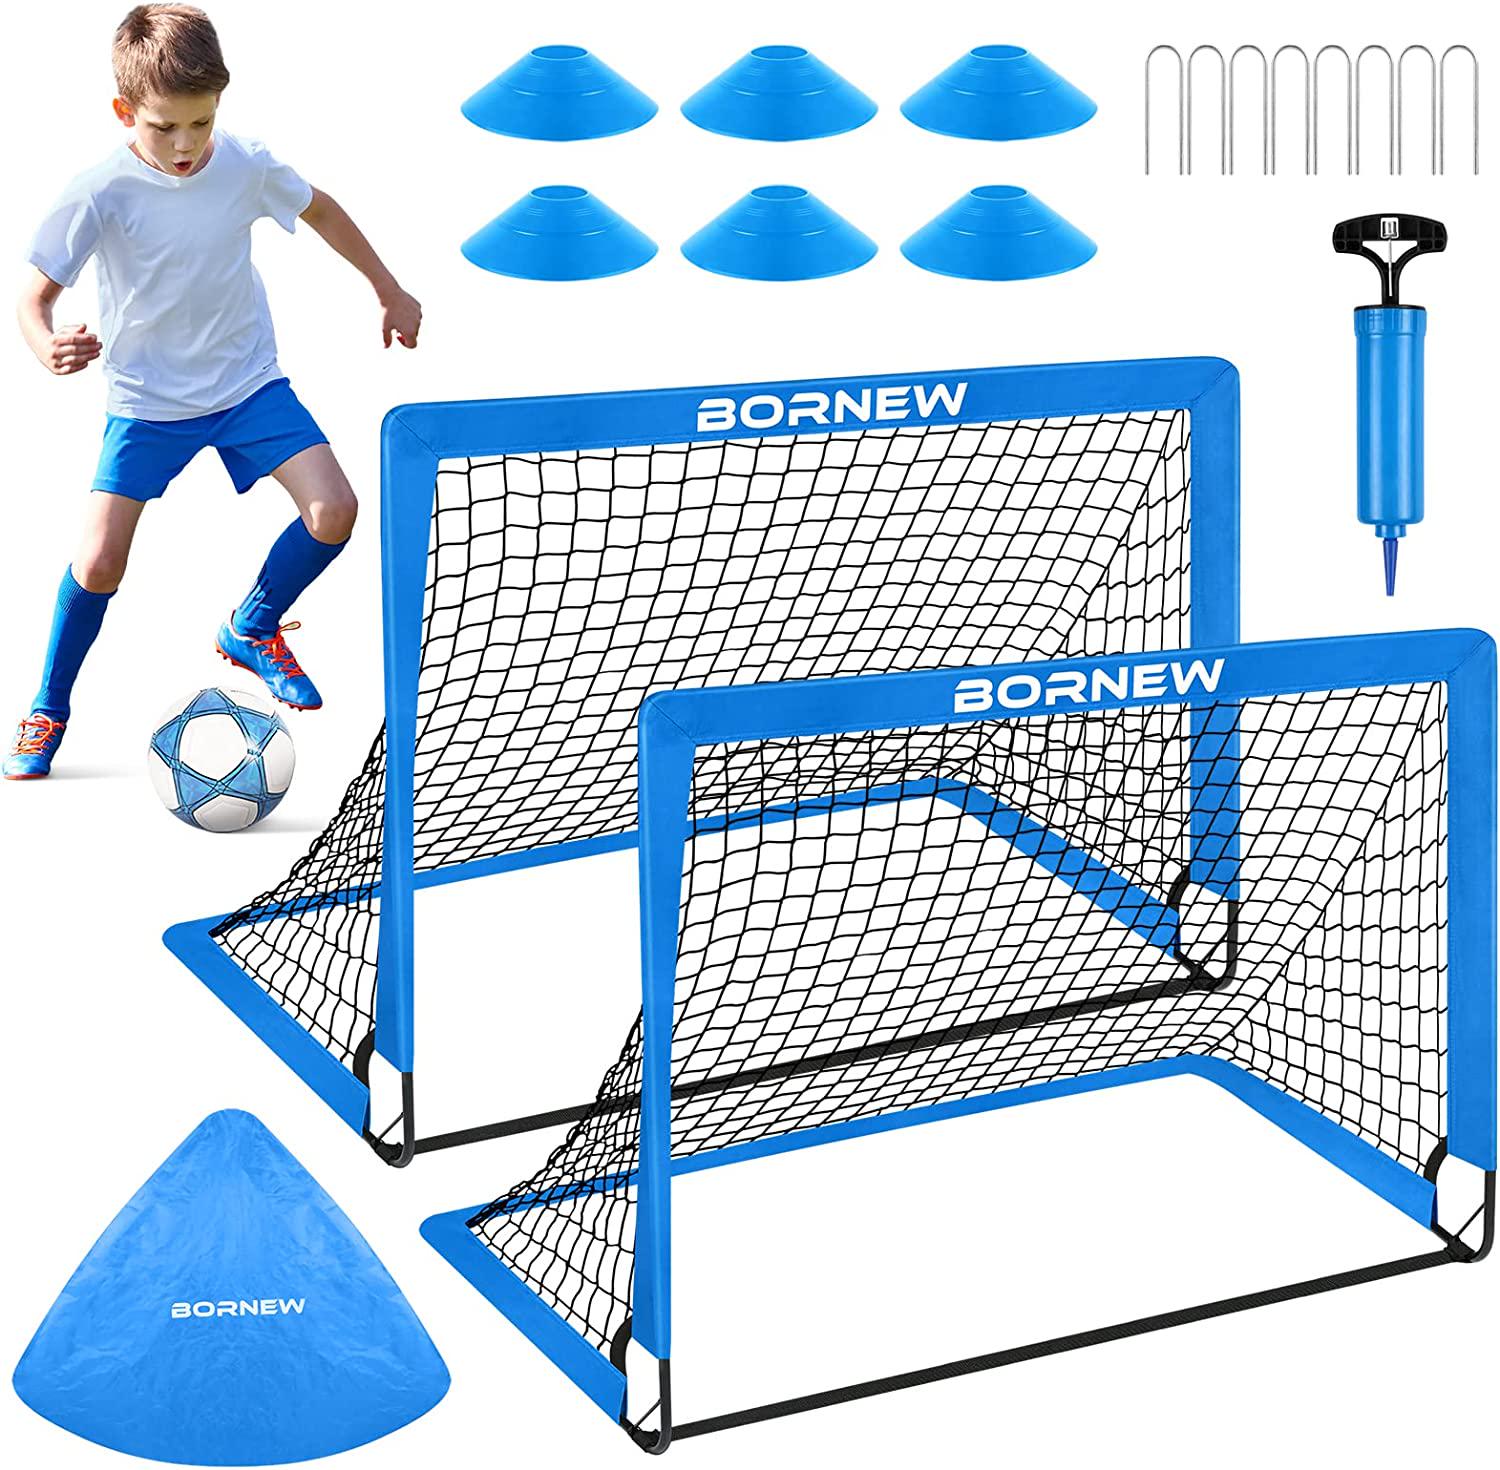 BORNEW, Kids Soccer Goal for Backyard Set - 2 Toddler Soccer Nets Training Equipment, Soccer Ball, Pop Up Portable Soccer Set for Kids and Youth Games and Training Goals - Size 4' x 3'